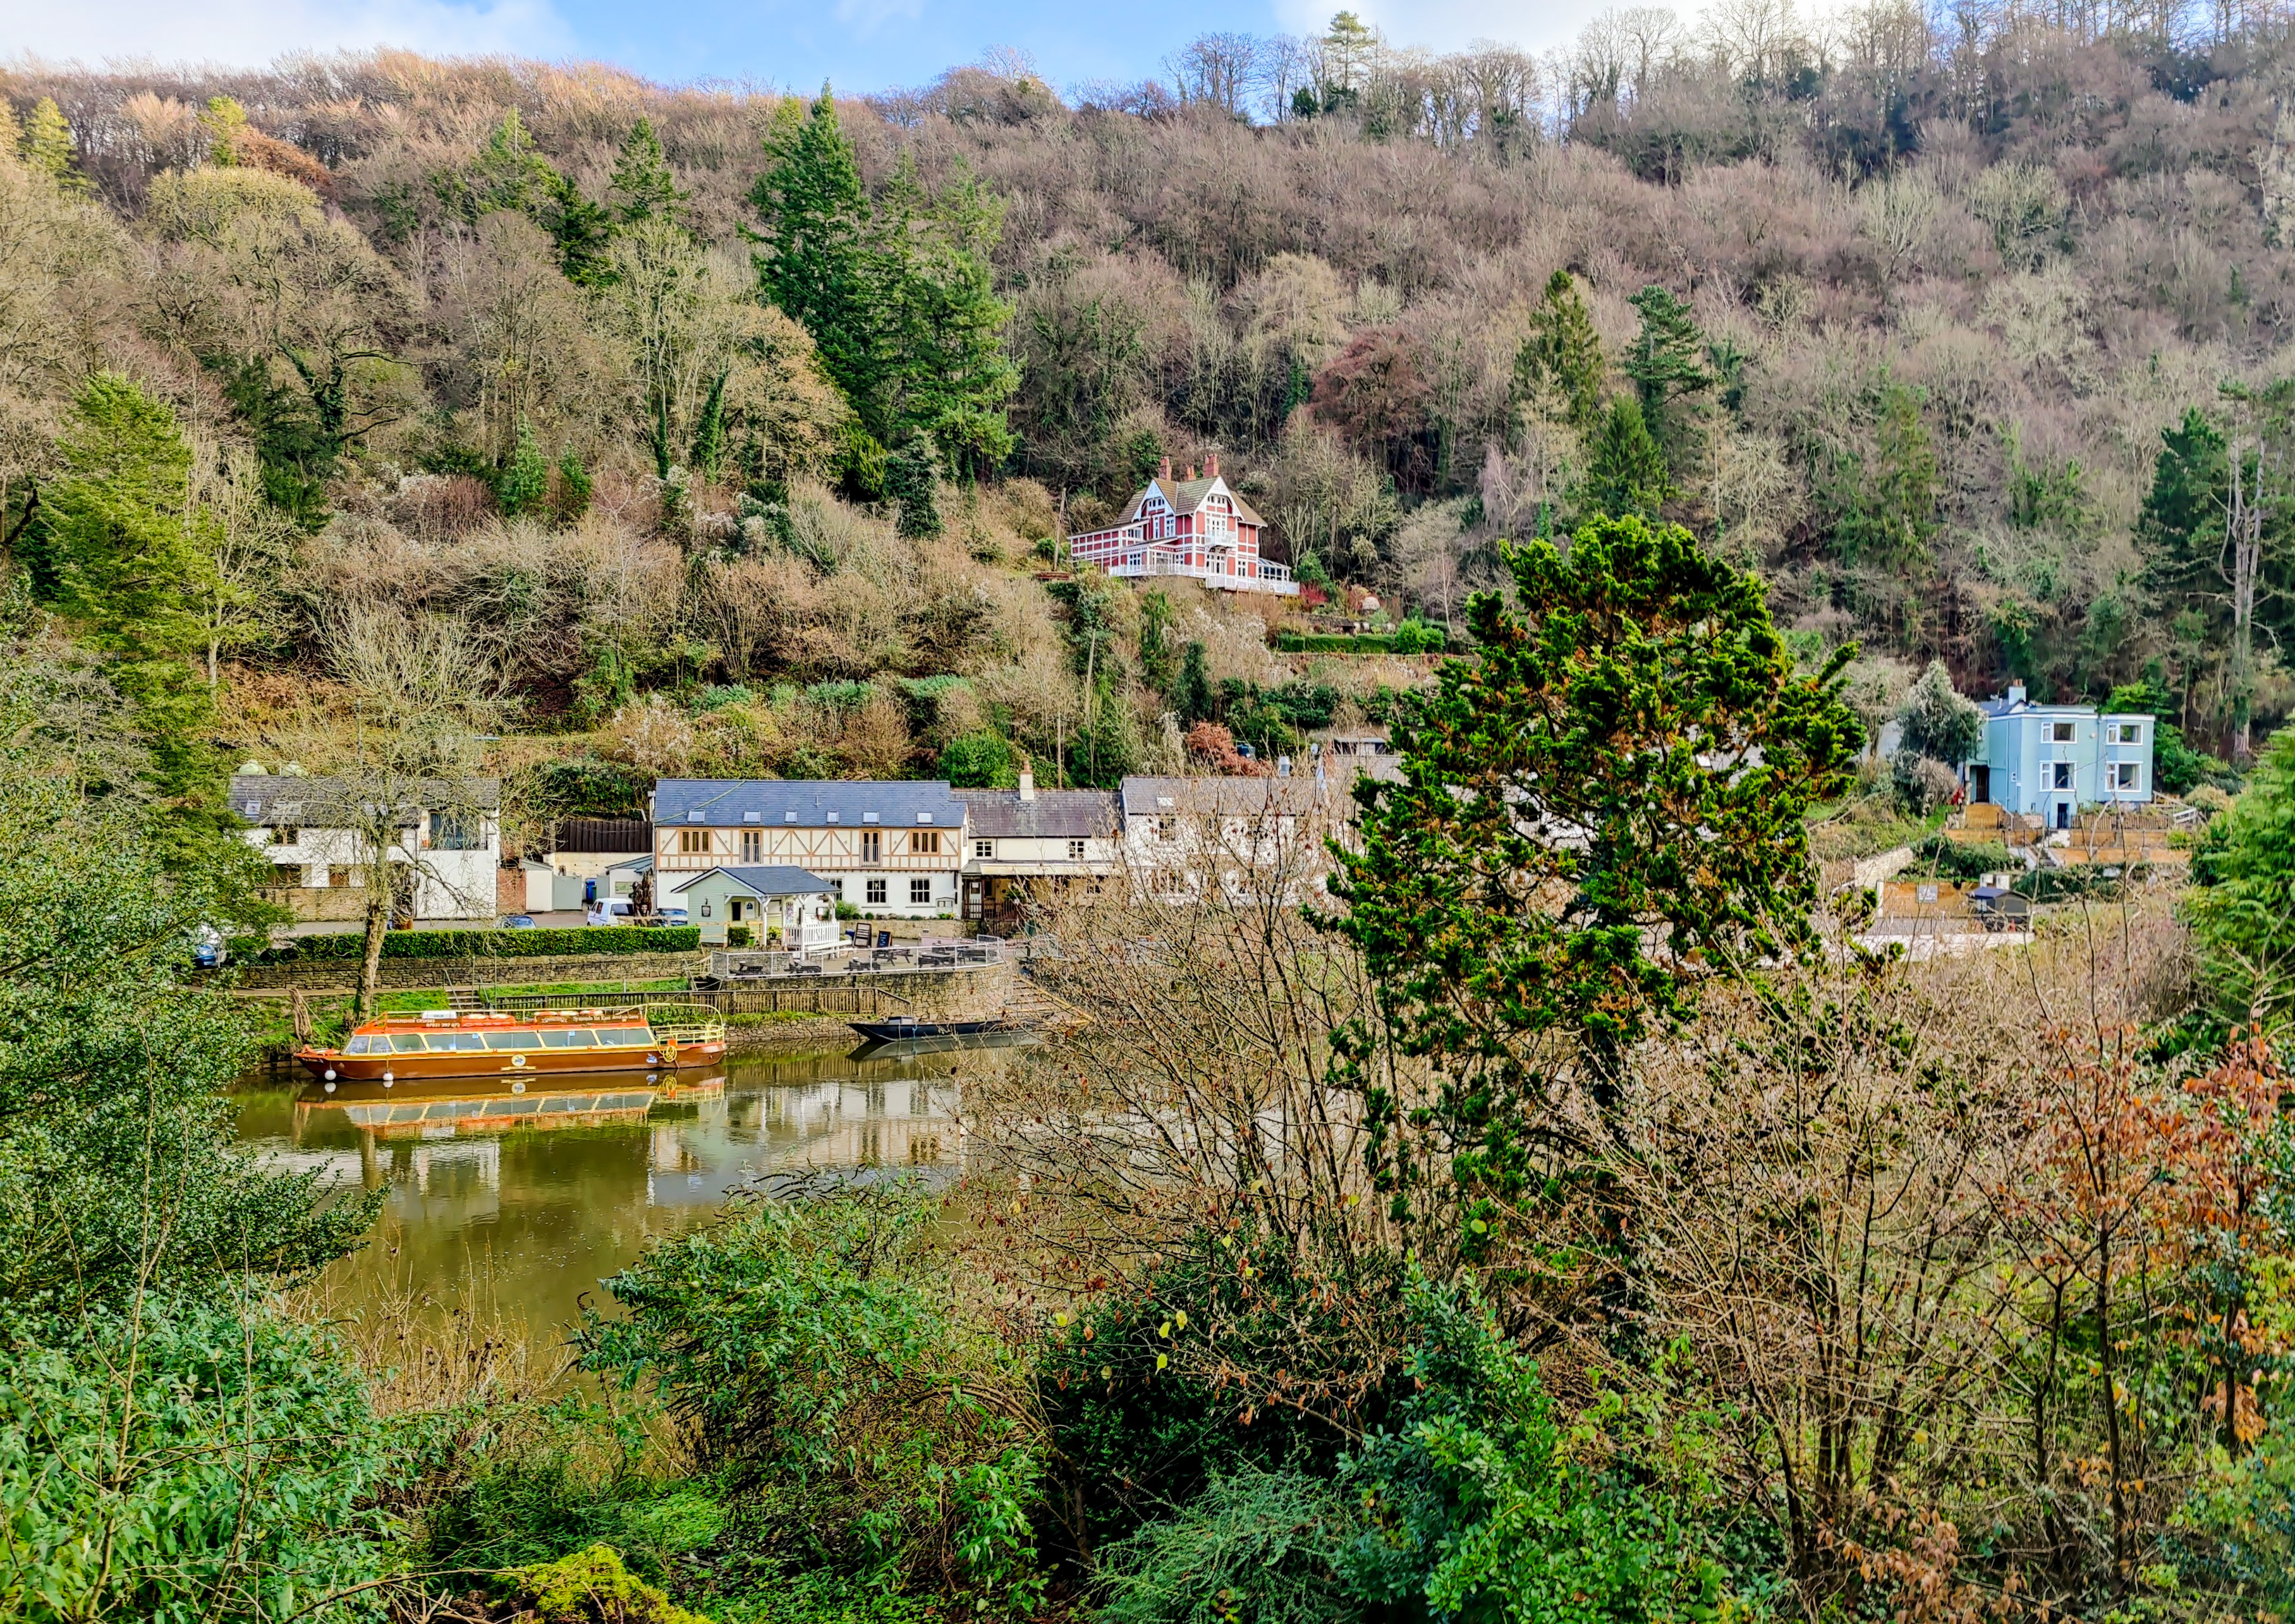 View of Symonds Yat and house that featured in Sex Education